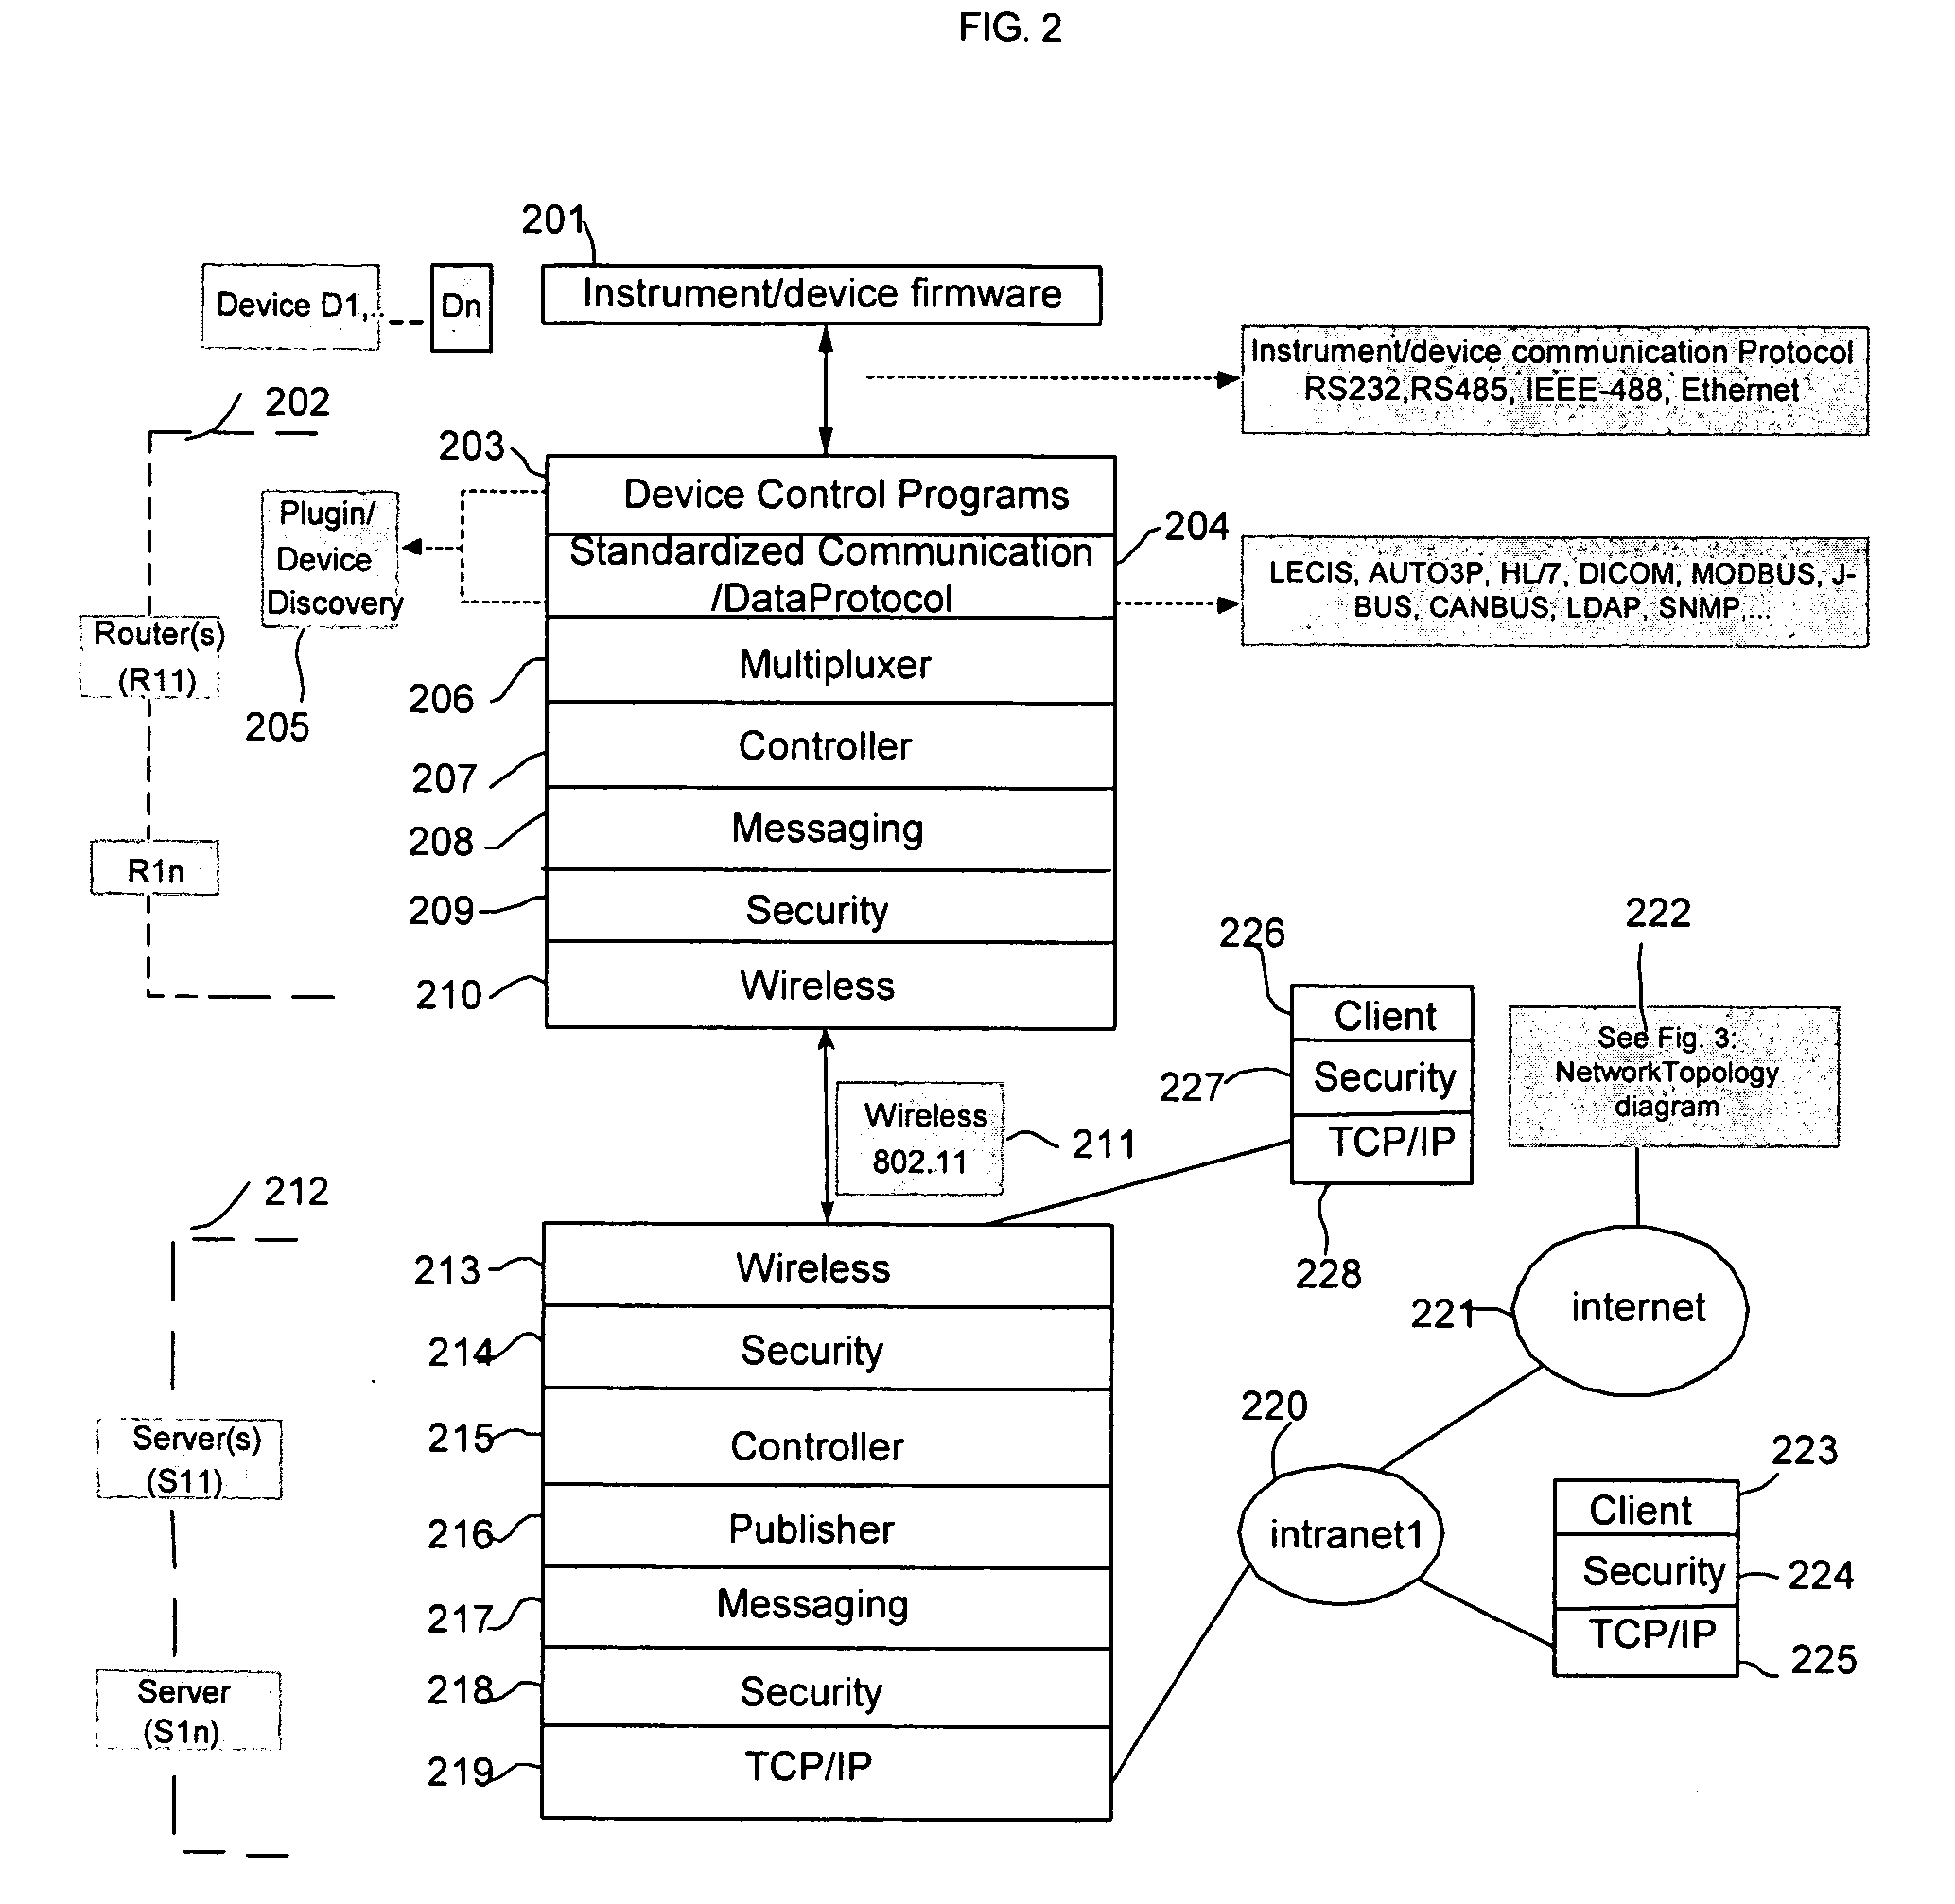 Embedded system and method for controlling, monitoring of instruments or devices and processing their data via control and data protocols that can be combined or interchanged